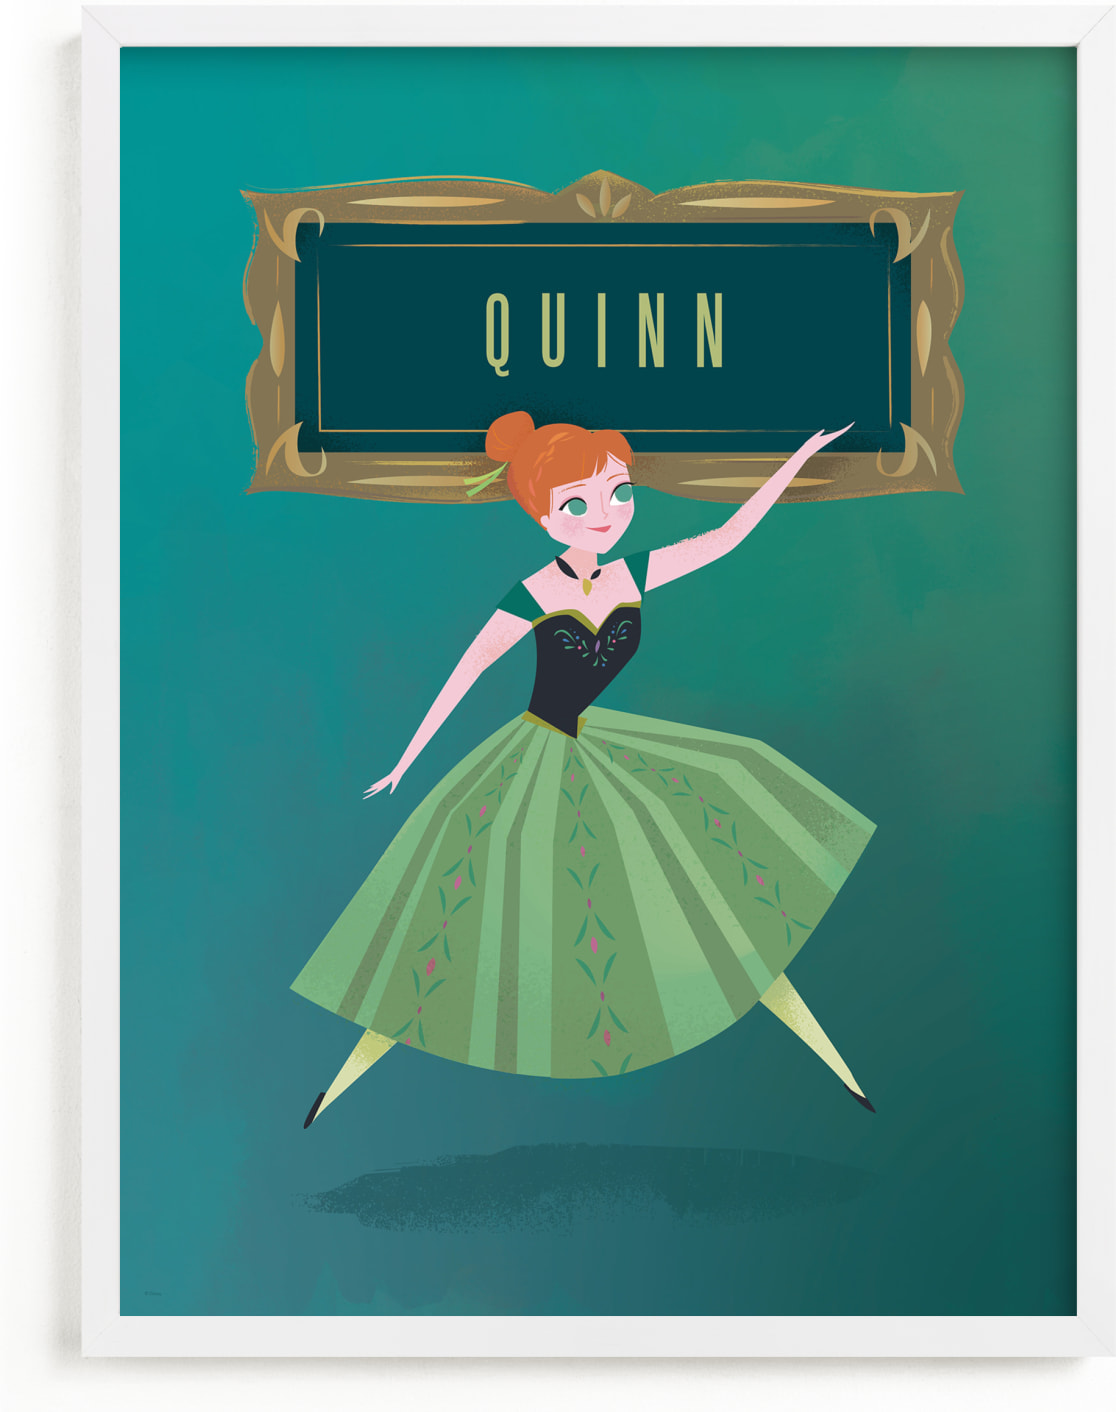 This is a green disney art by Lori Wemple called Anna's Frame from Disney's Frozen.